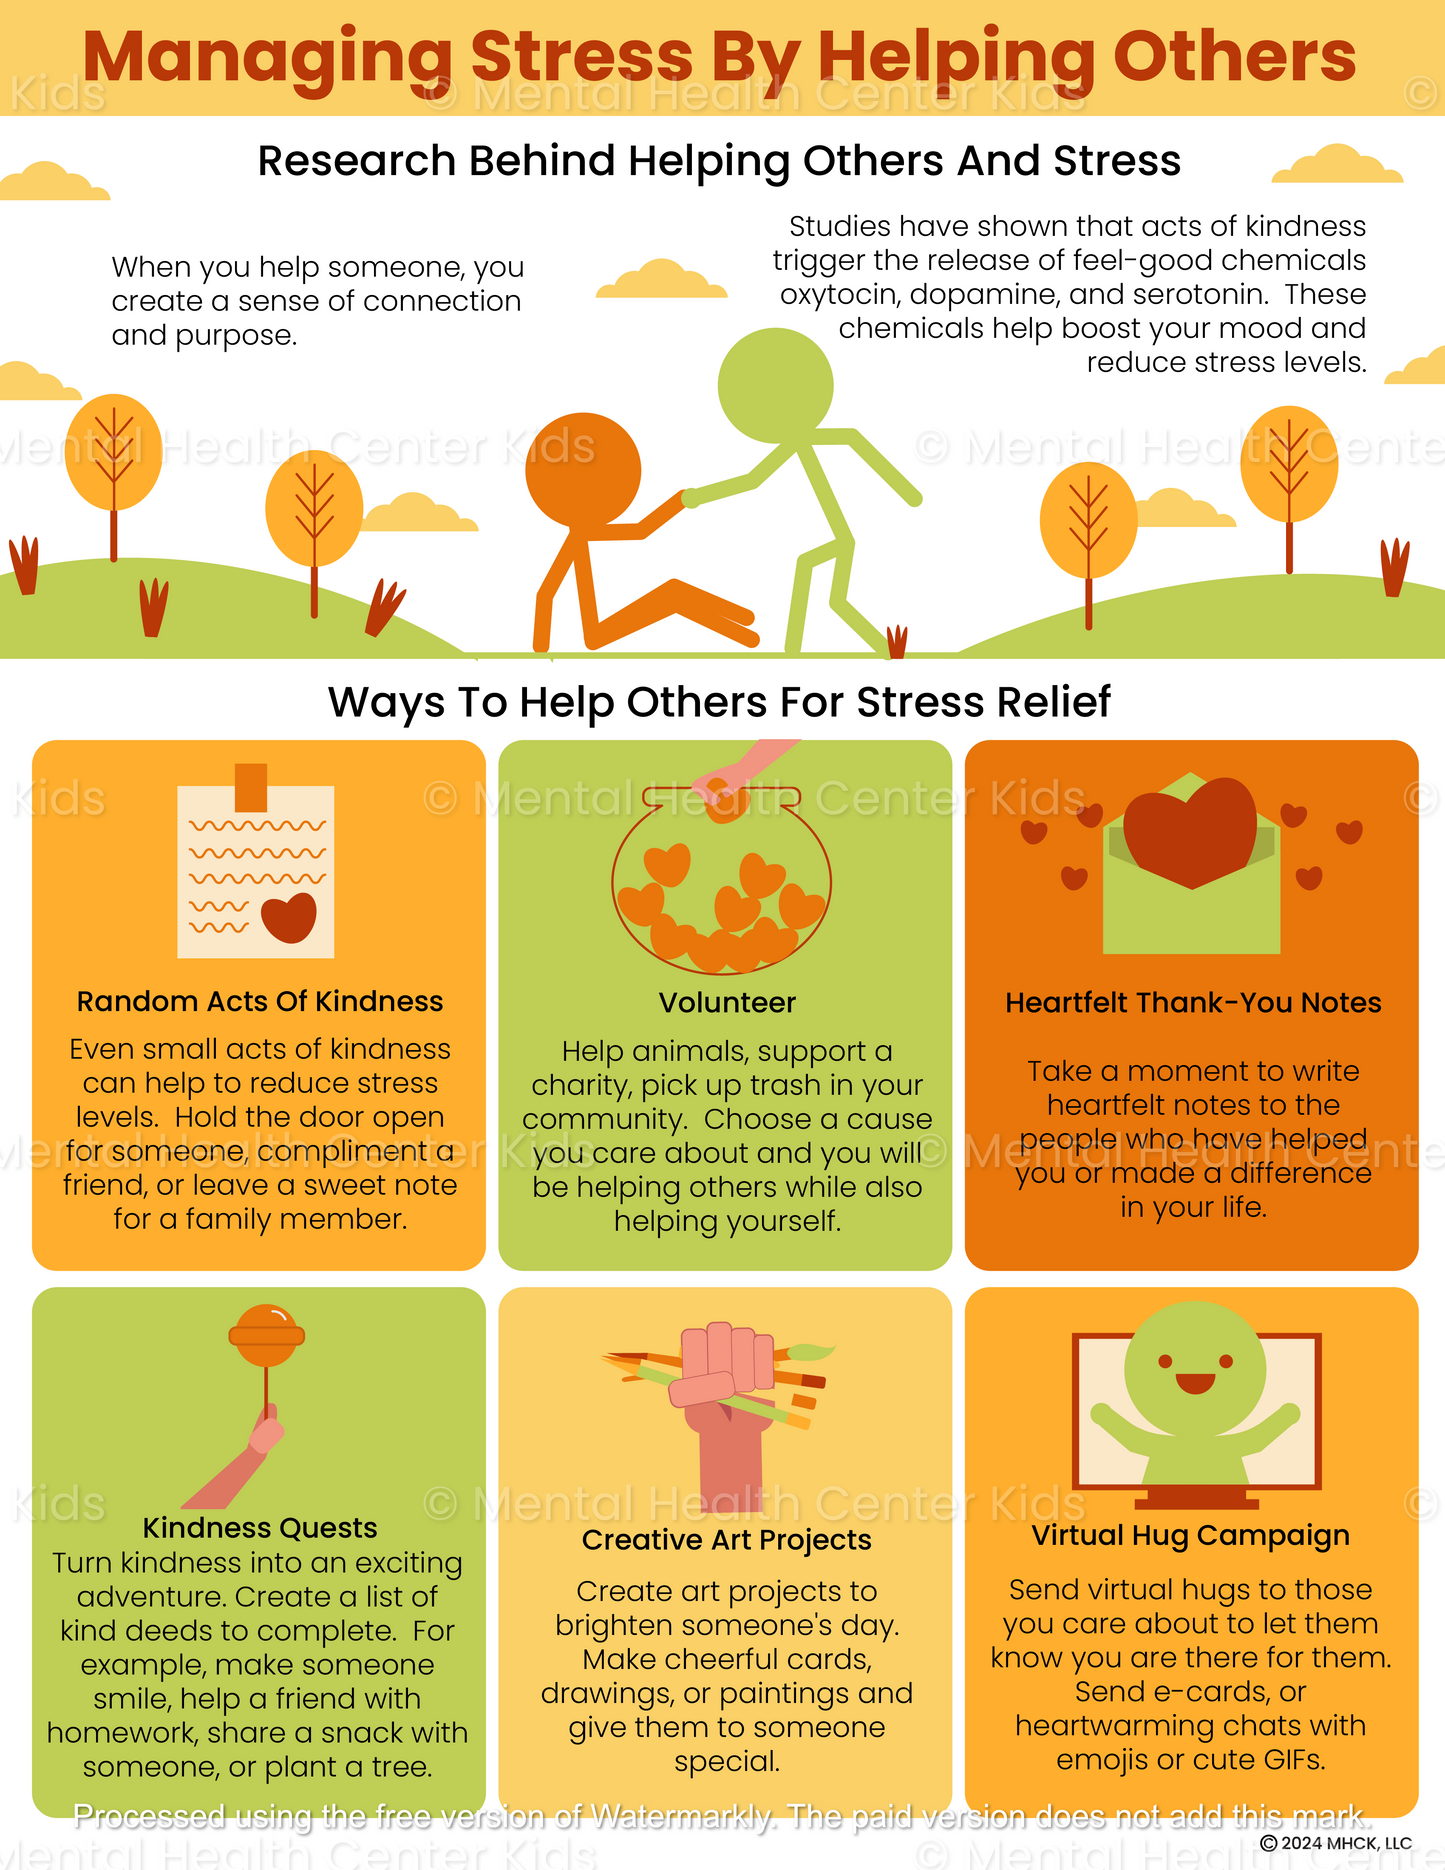 managing stress by helping others handout